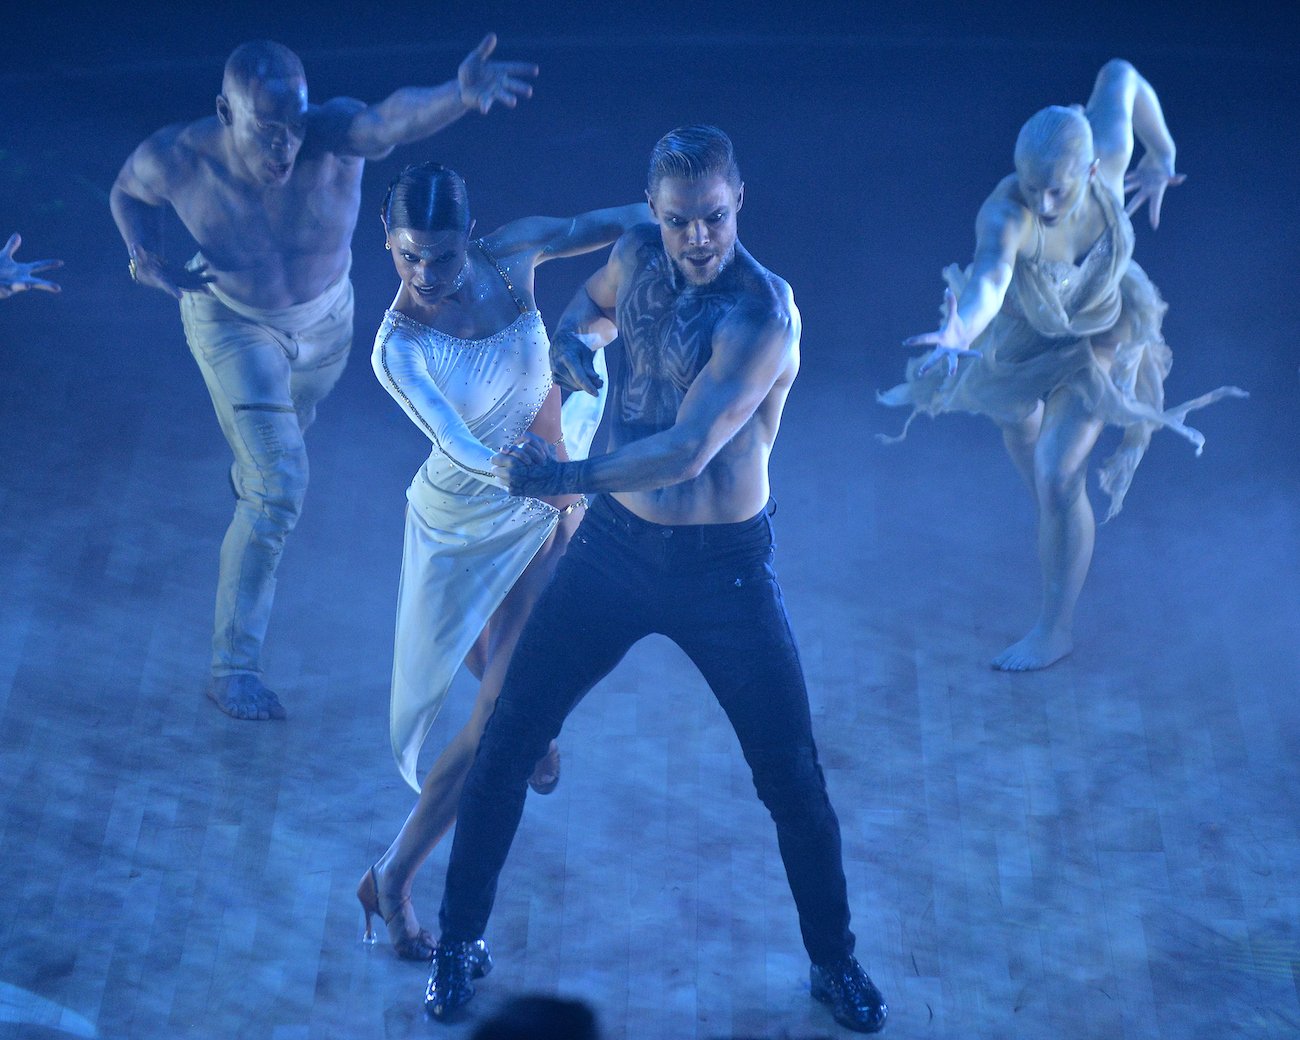 Derek Hough holds Hayley Erbert during their 'Tango of the Dead' from 'Dancing with the Stars' Season 30